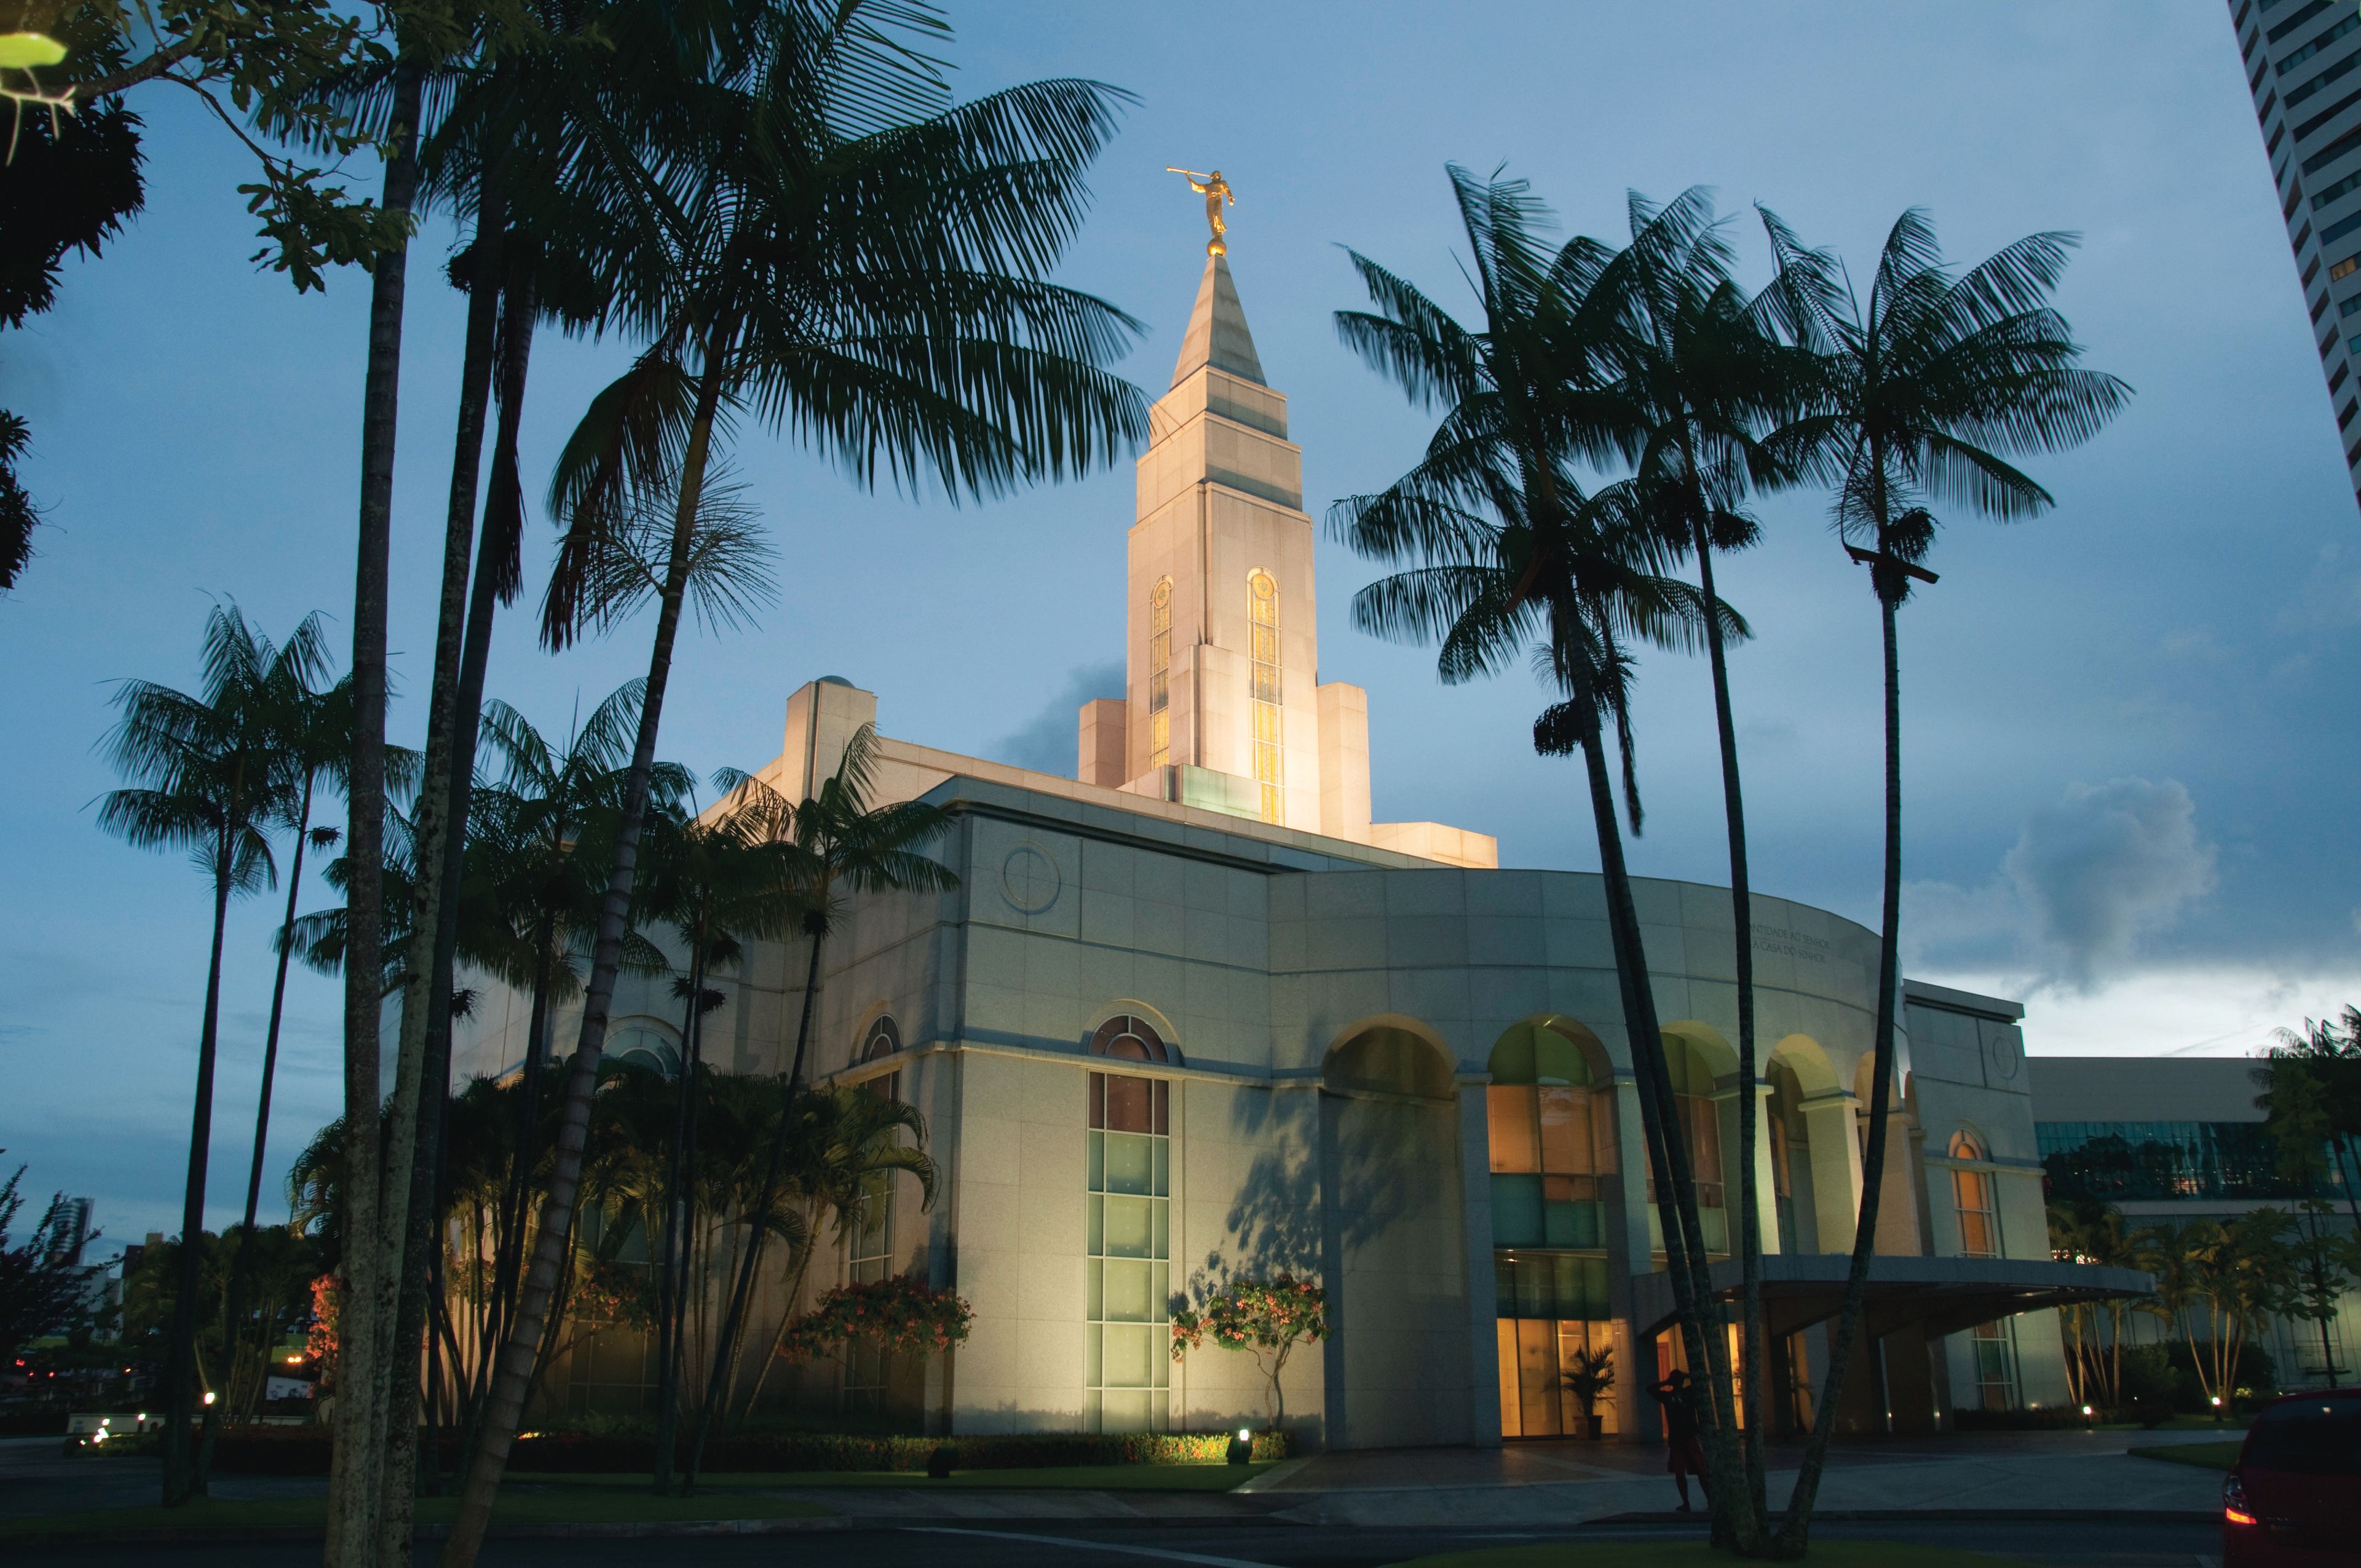 The Recife Brazil Temple in the evening, including the entrance and scenery.